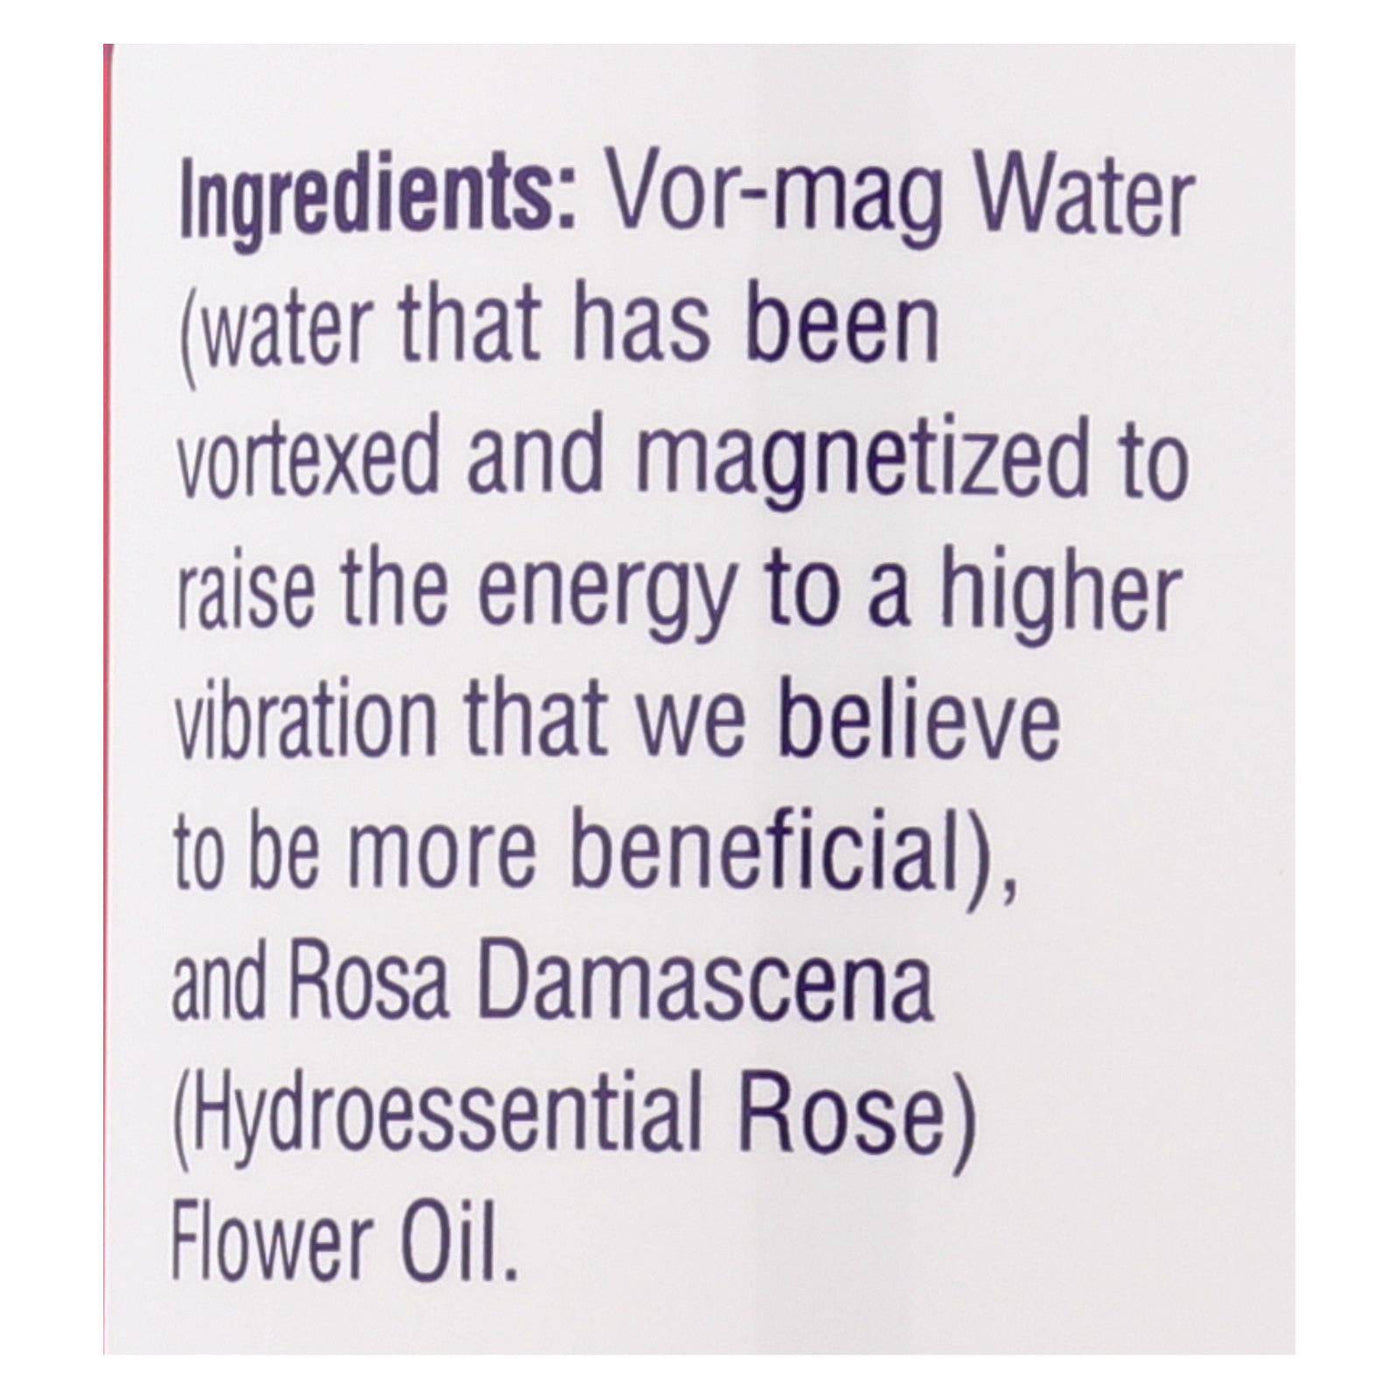 Heritage Products Rose Petals Rosewater - 8 Fl Oz | OnlyNaturals.us